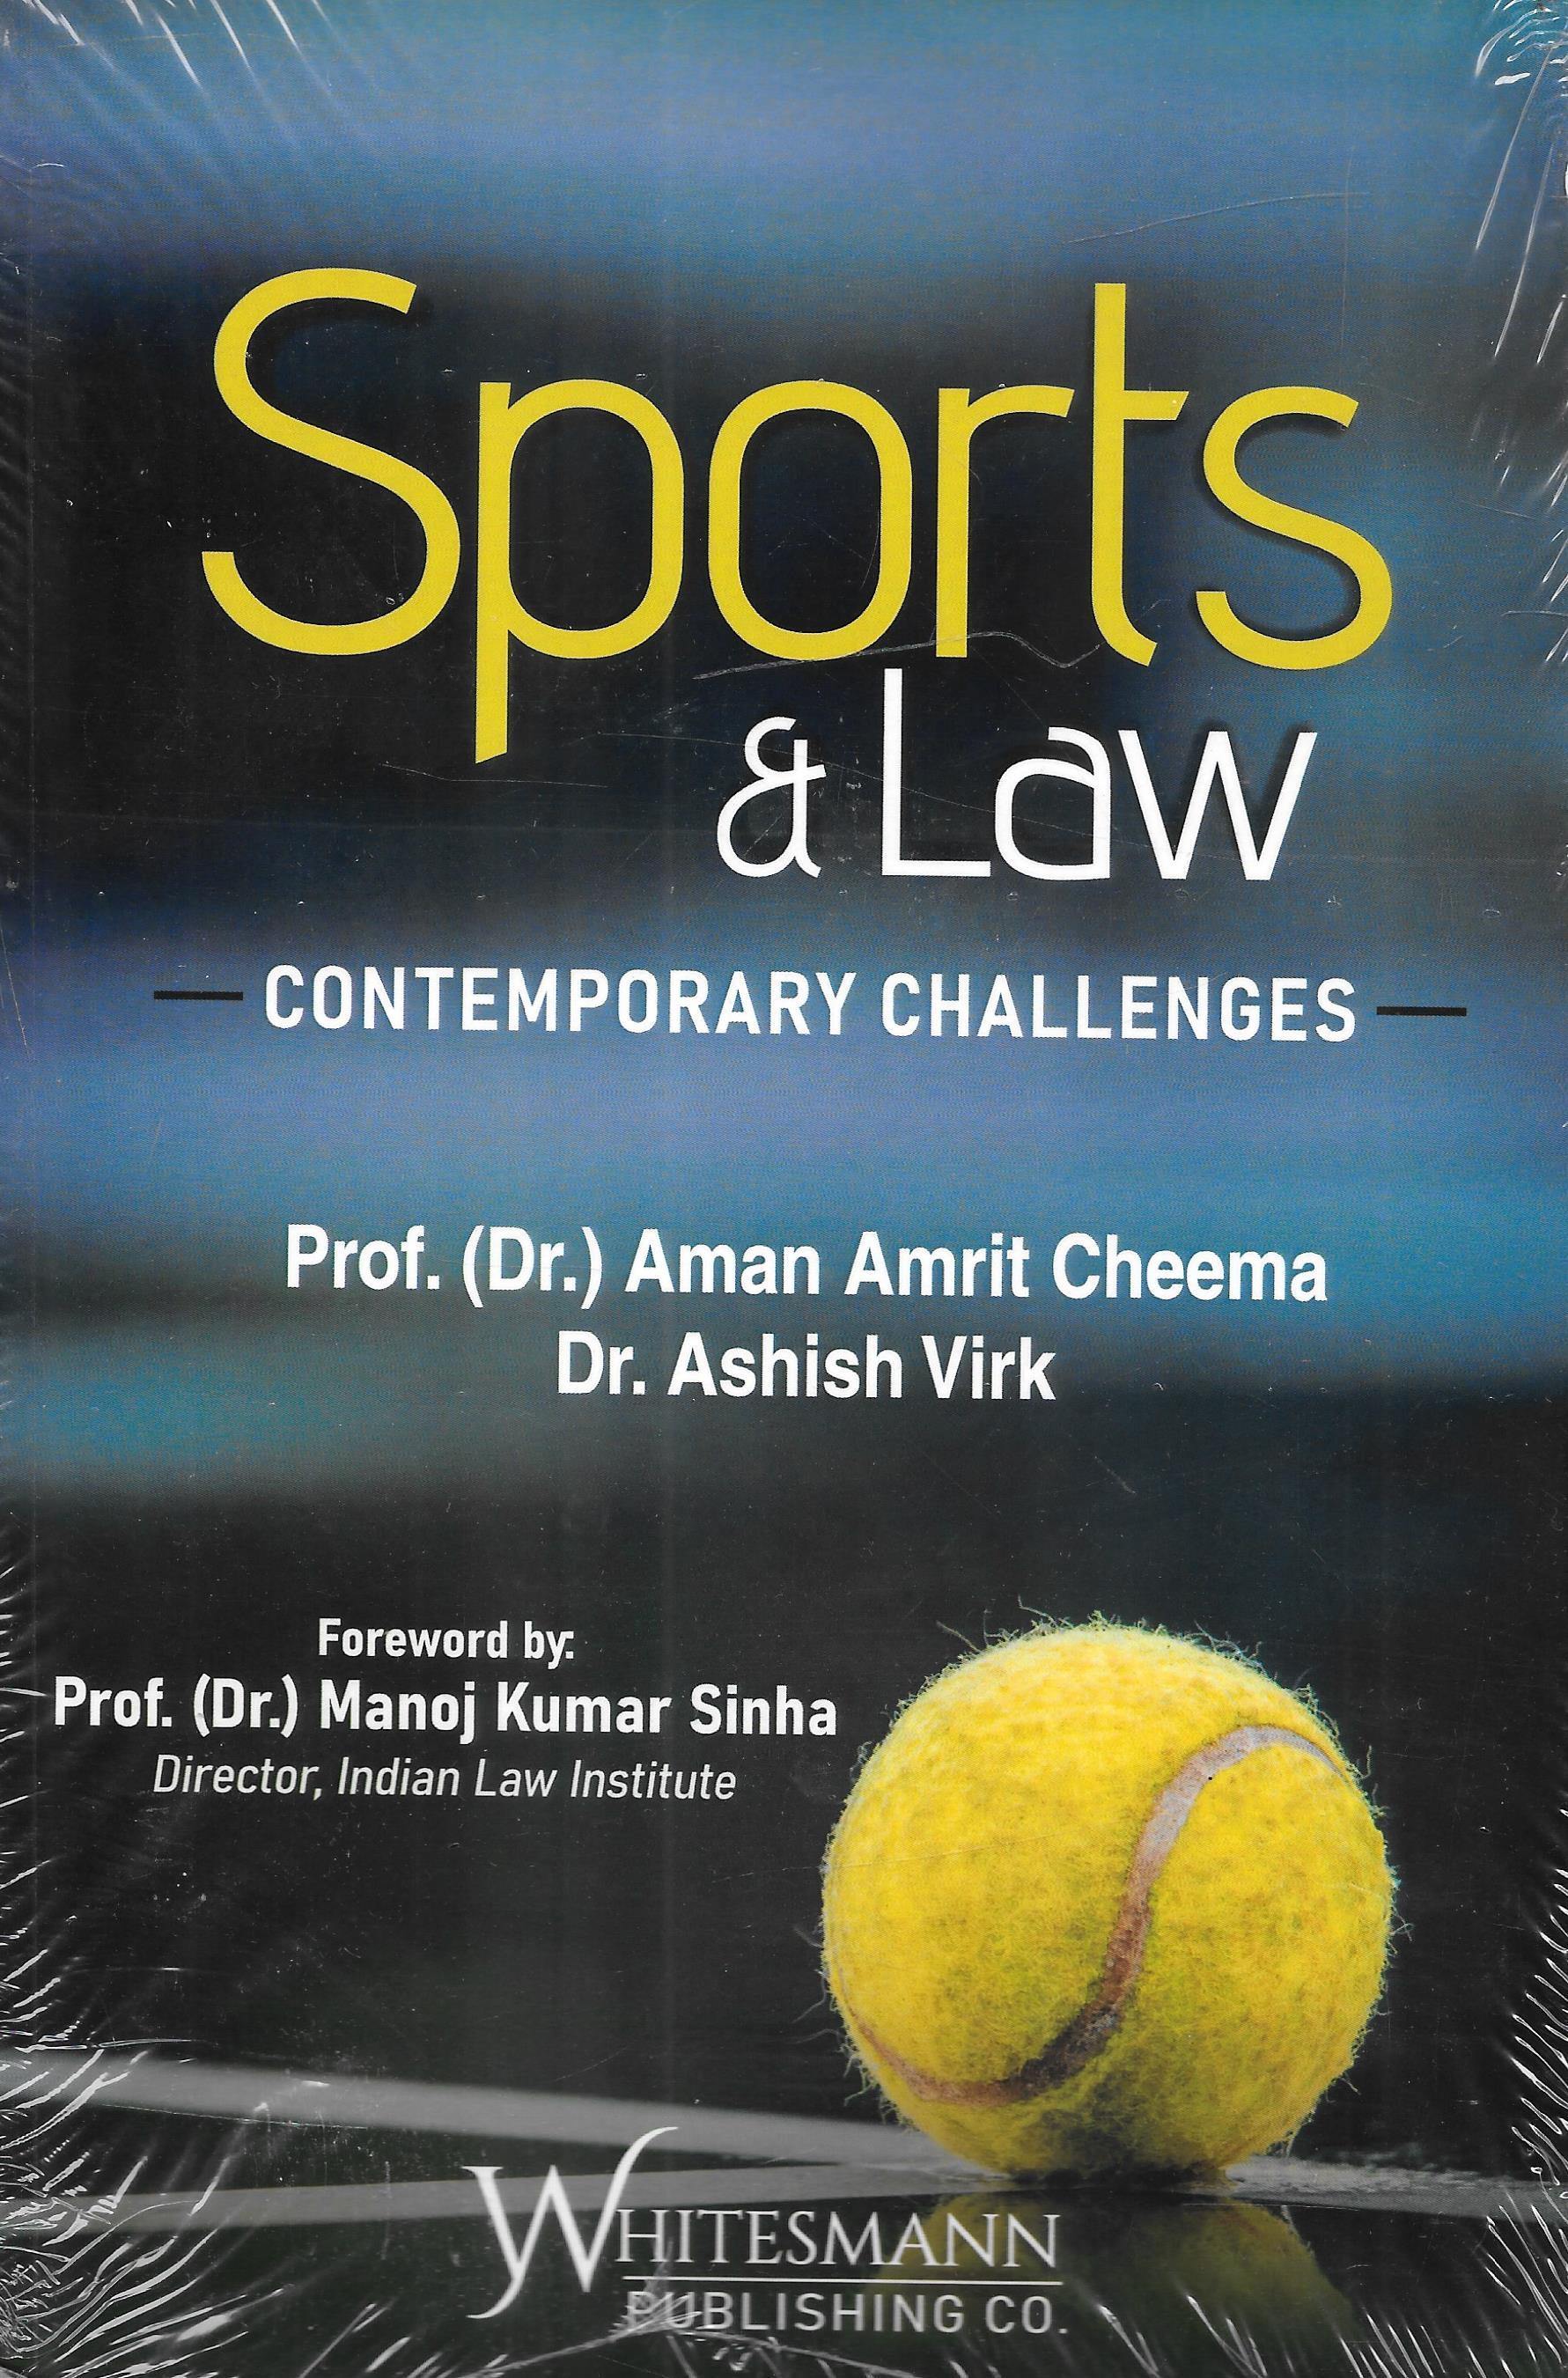 Sports & Law Contemporary Challenges - M&J Services